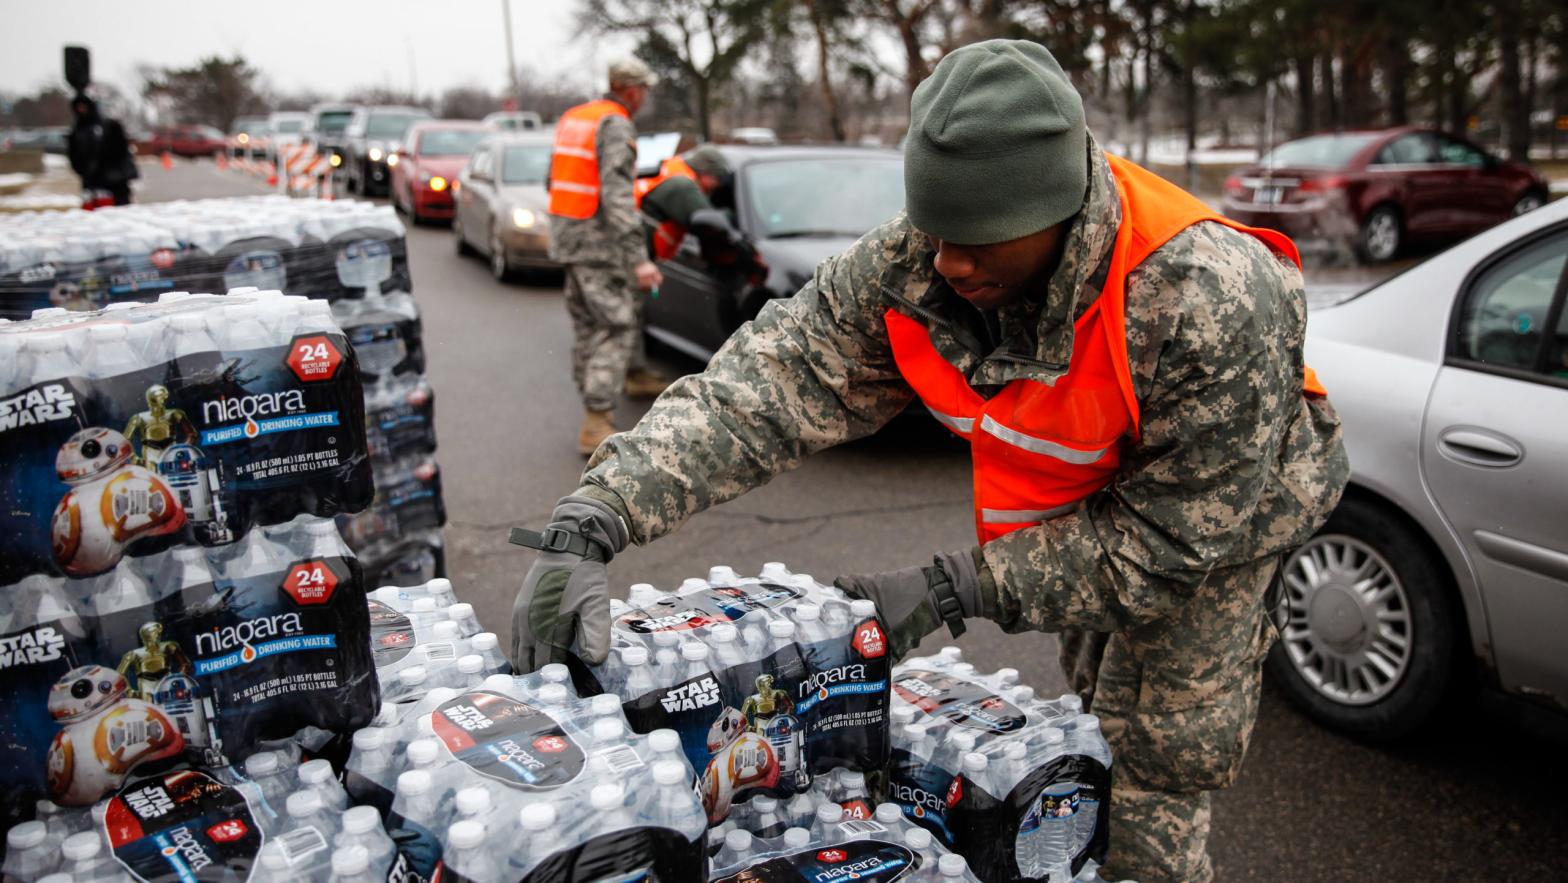 Army National Guard Specialist David Brown loads bottled water into waiting cars at a fire station on Jan. 21, 2016 in Flint, Michigan. (Photo: Sarah Rice, Getty Images)